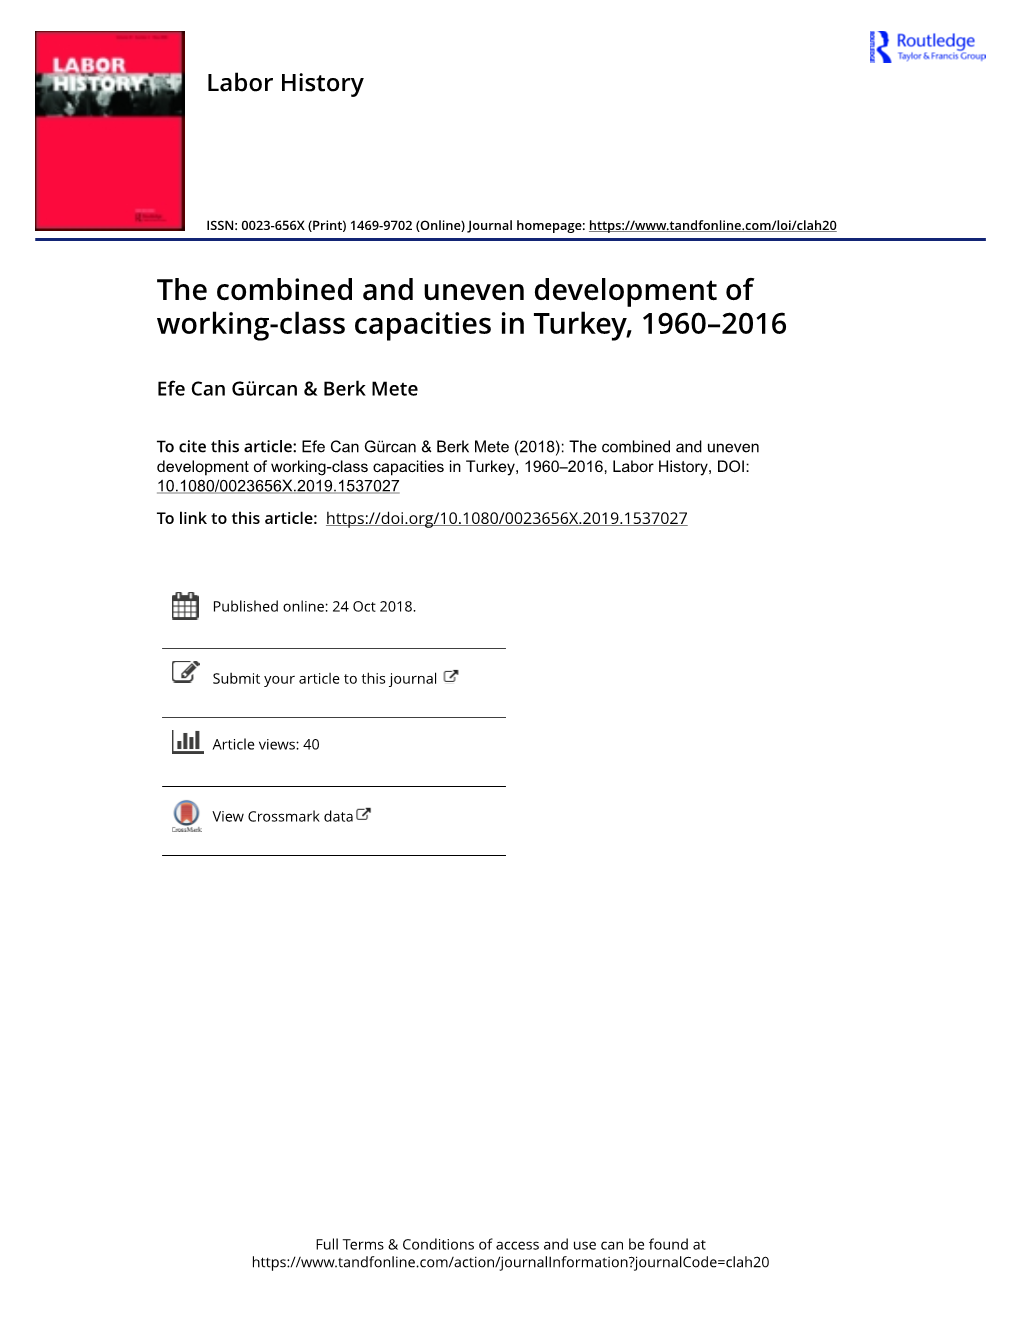 The Combined and Uneven Development of Working-Class Capacities in Turkey, 1960–2016